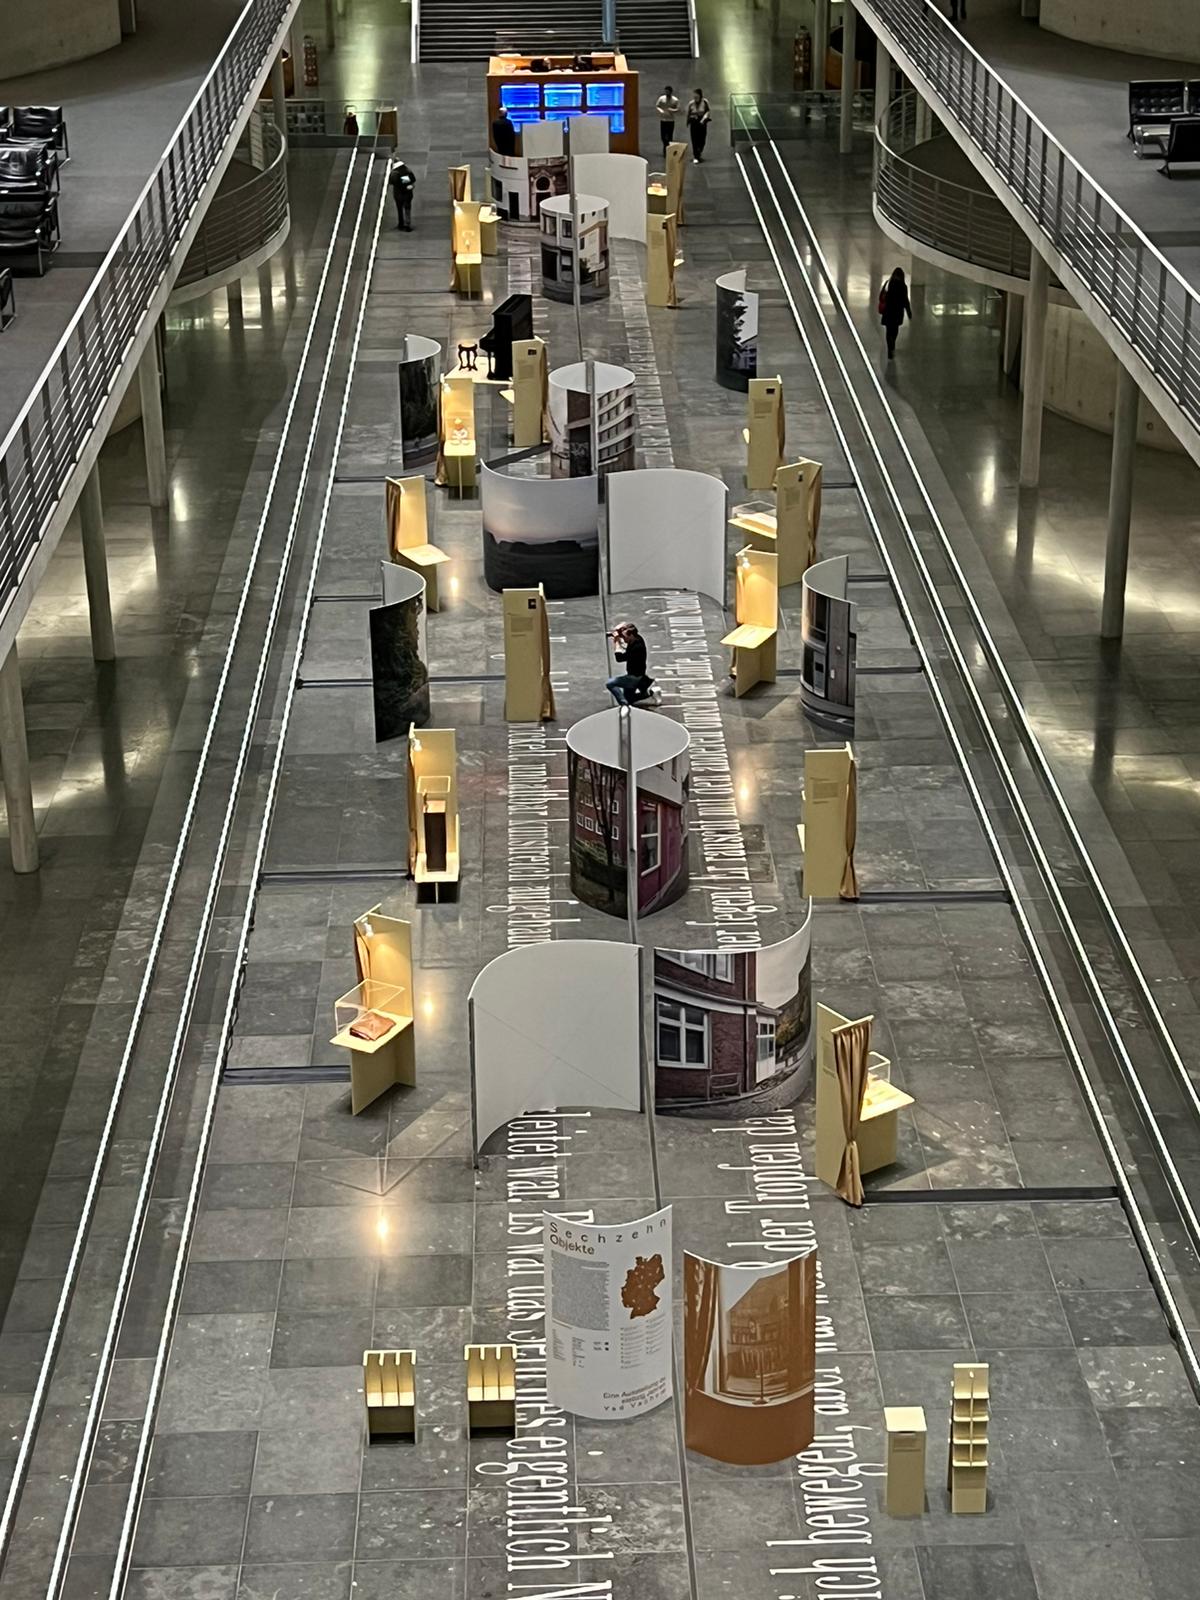 The "Sixteen Objects" Exhibition now displayed in the Bundestag